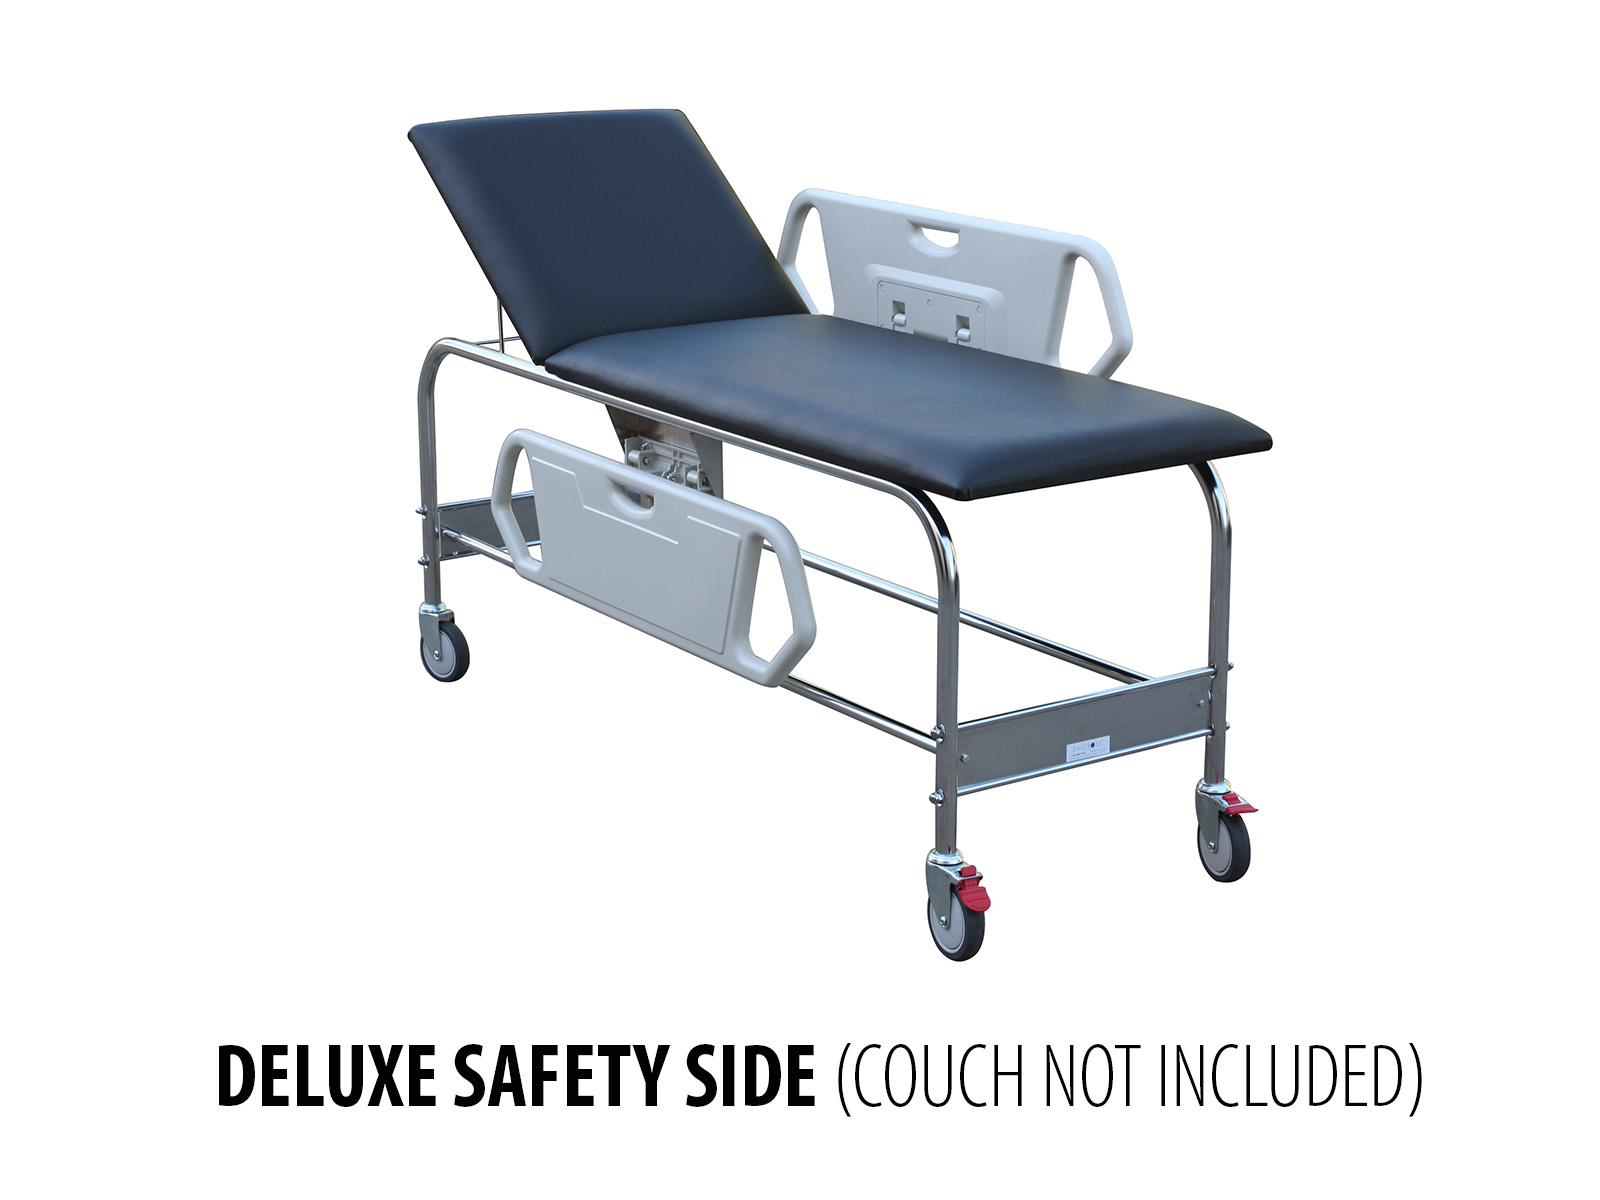 Casualty Couch Safety Rails - Pair